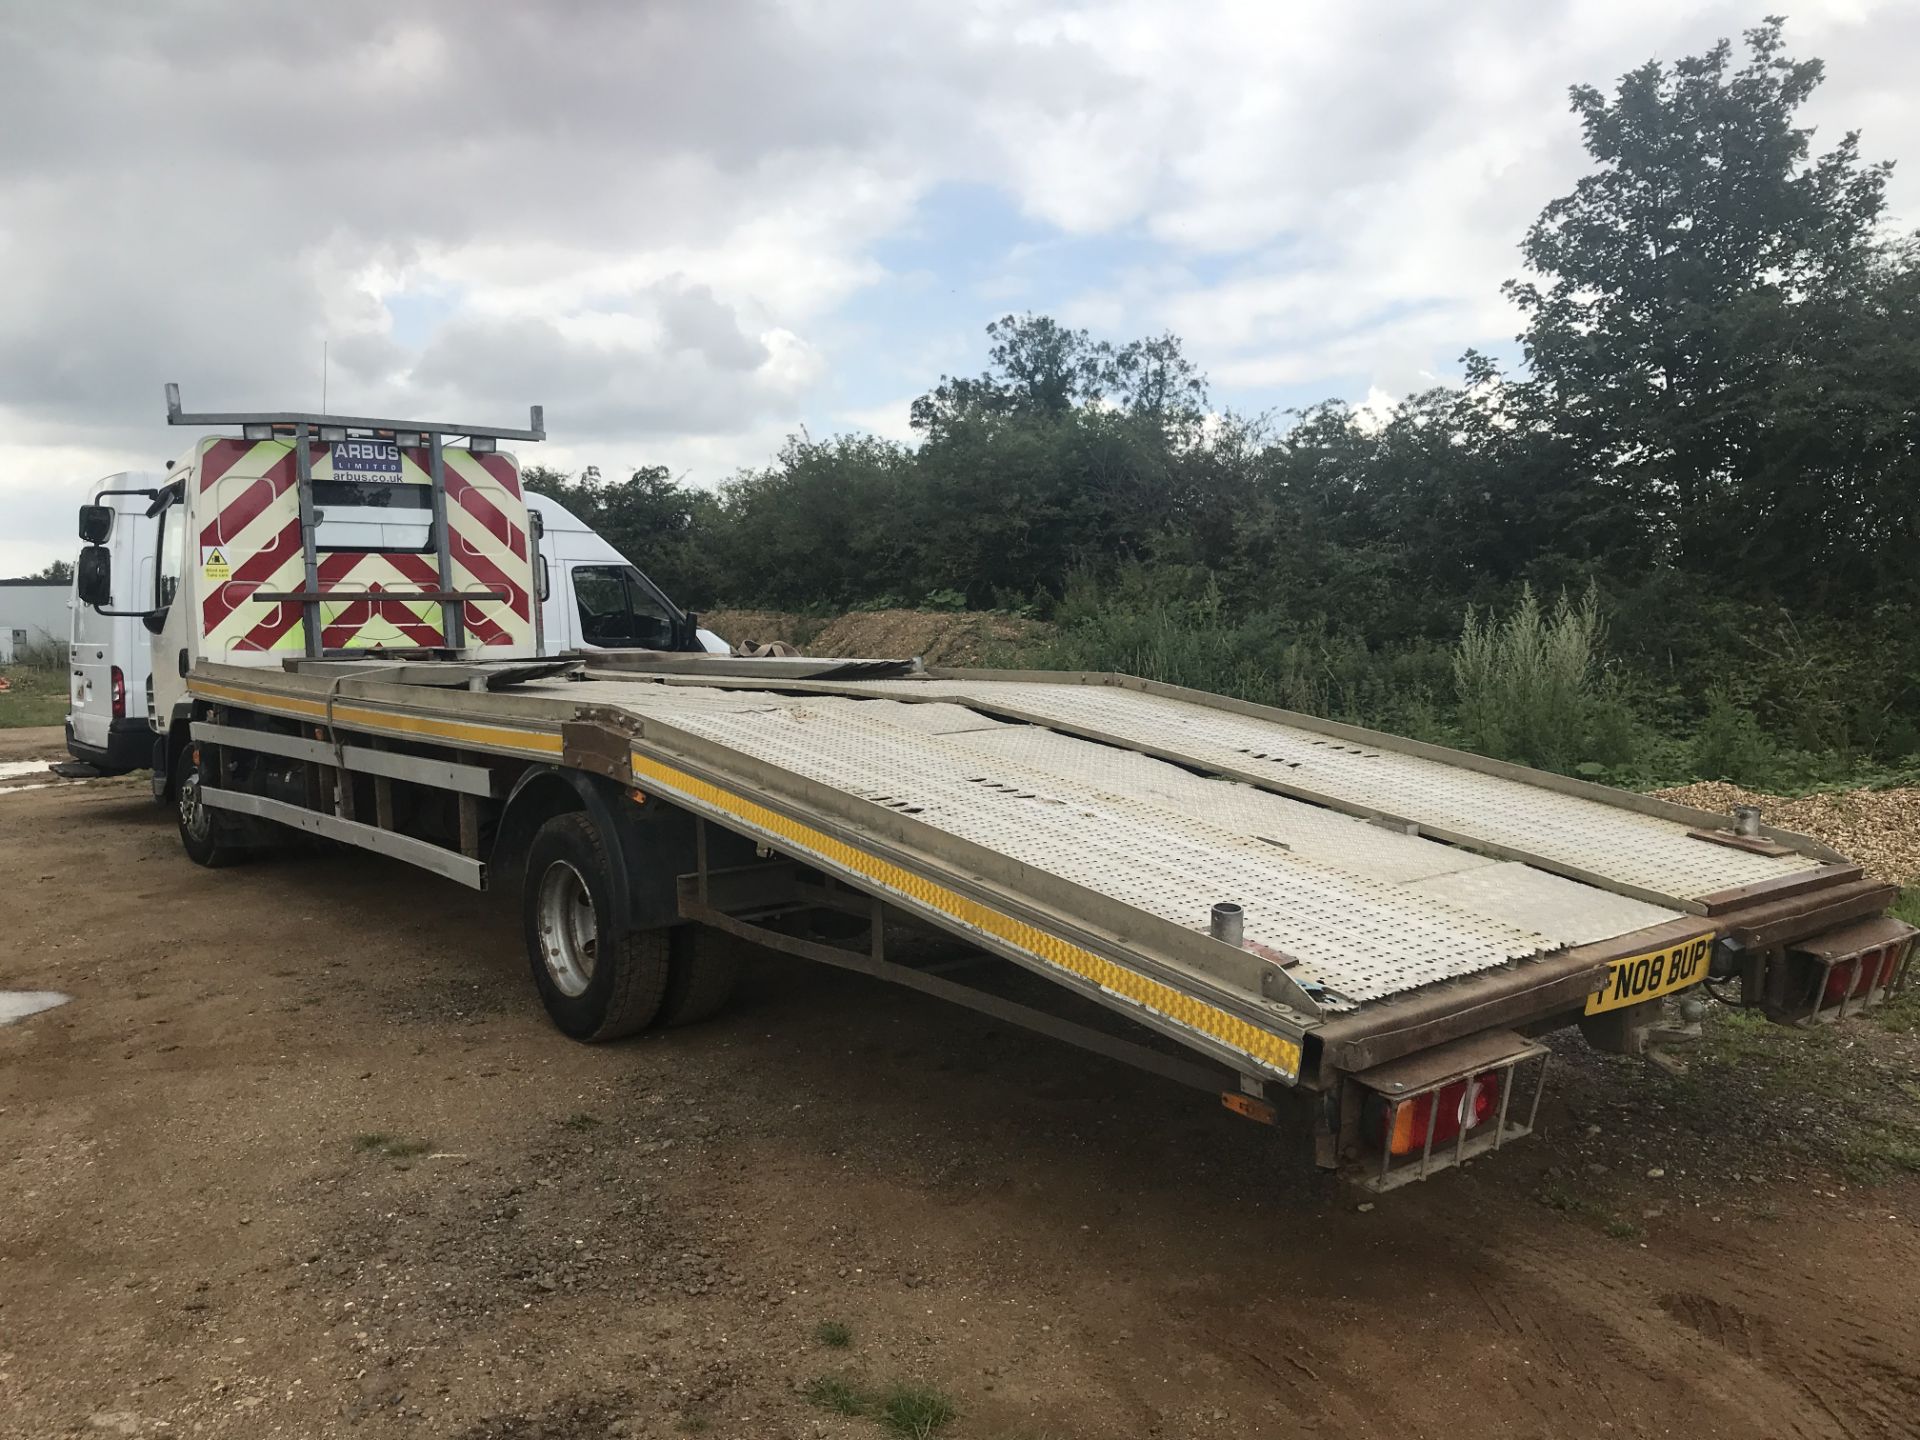 DAF 45.160 7500KG 26 FOOT BEAVERTAIL RECOVERY TRUCK - 08 REG - LEZ COMPLIANT - ELECTRIC WINCH - Image 4 of 14